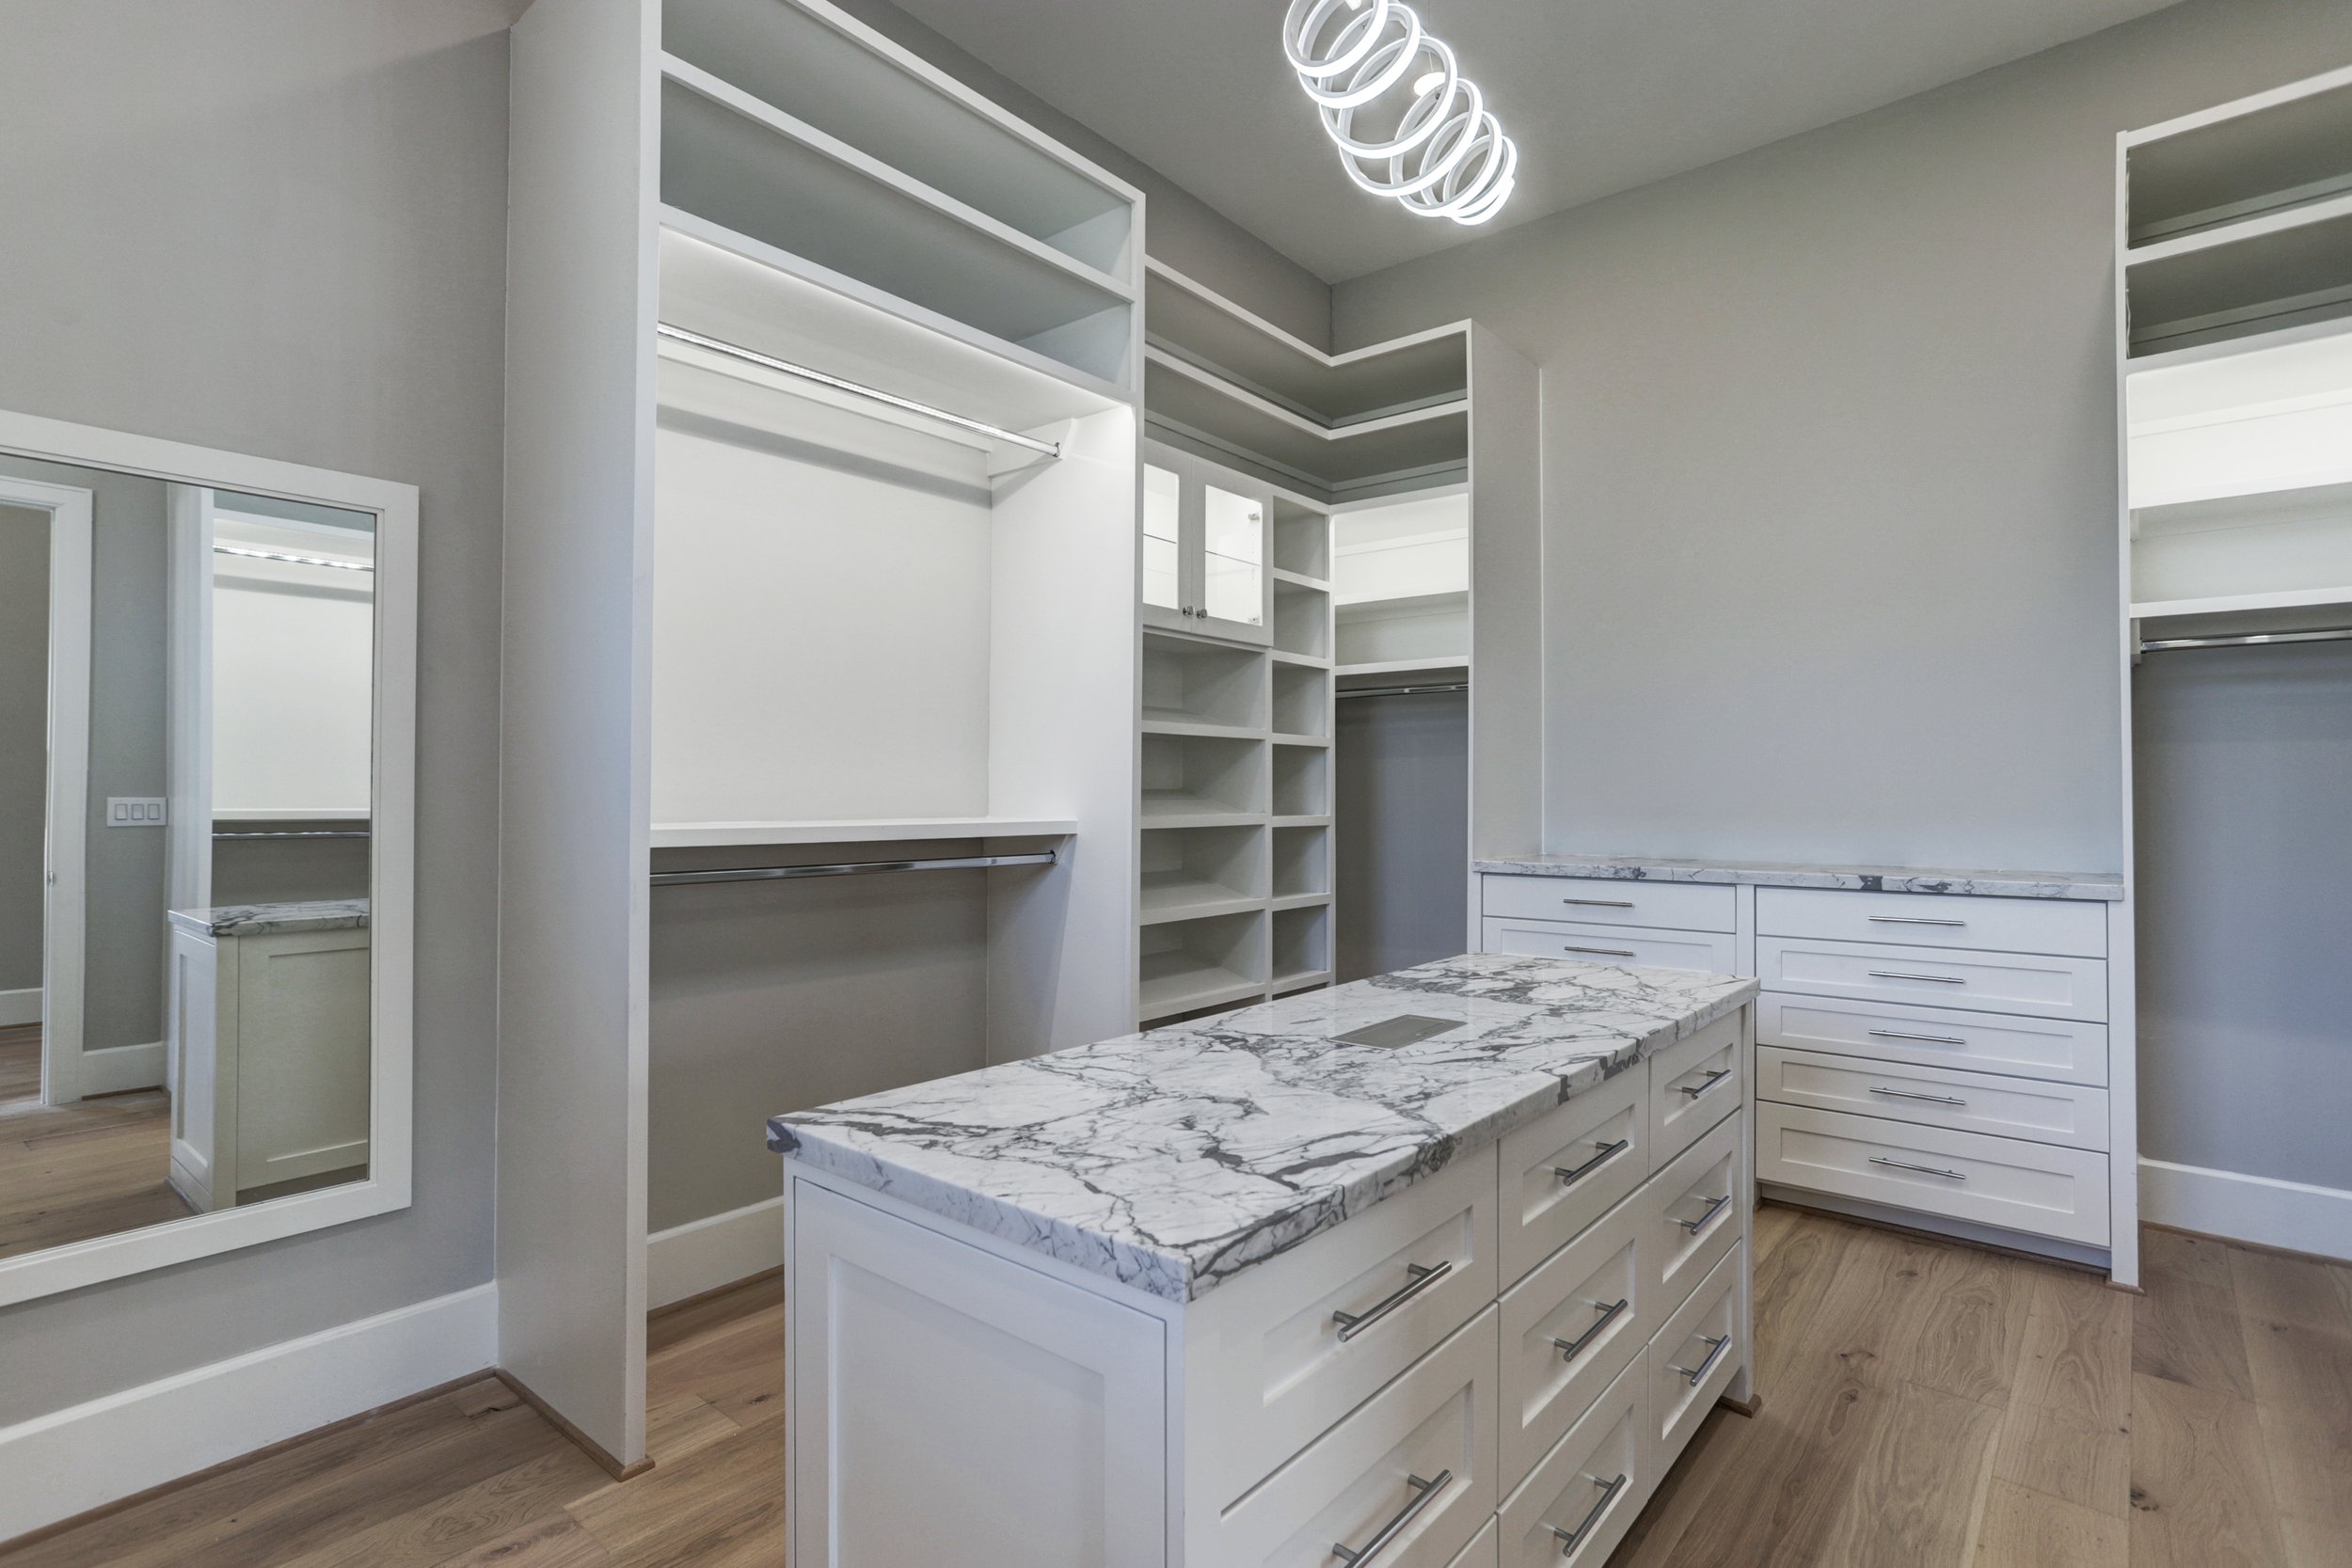 Here are some additional tips for transforming a spare bedroom into a walk-in closet: